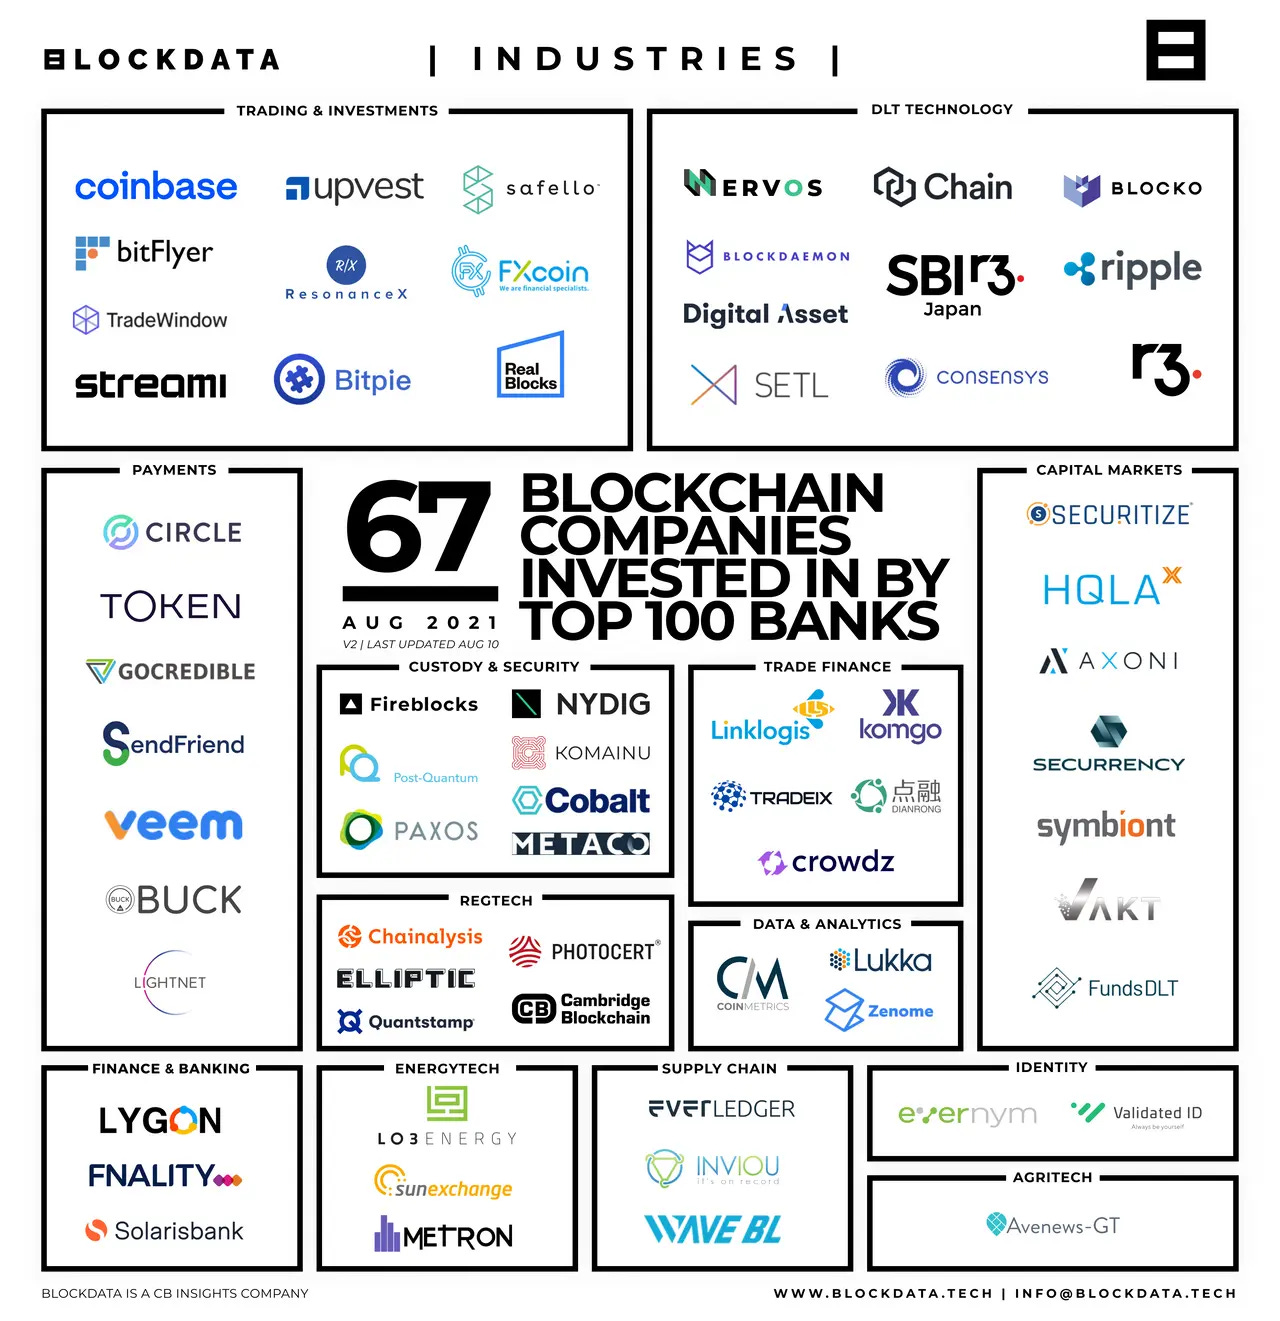 Blockchain companies invested in by top 100 banks